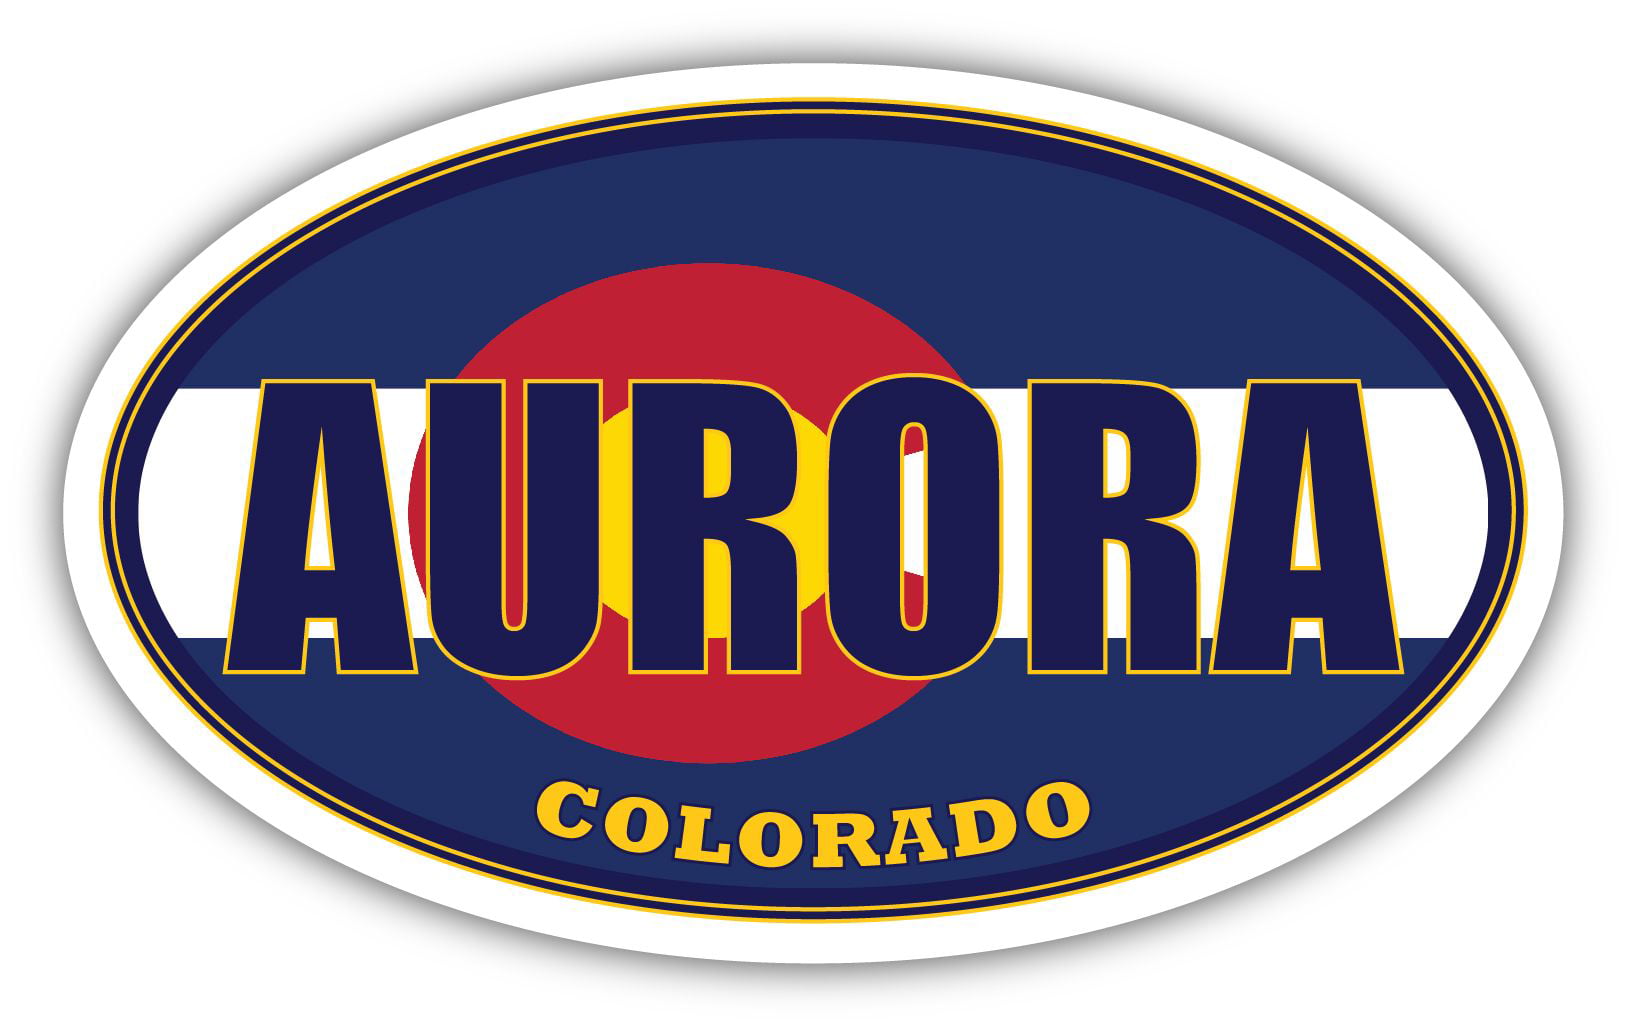 Colorado Oval Car Decal Window Bumper Wall Sticker You Pick Size and Color 